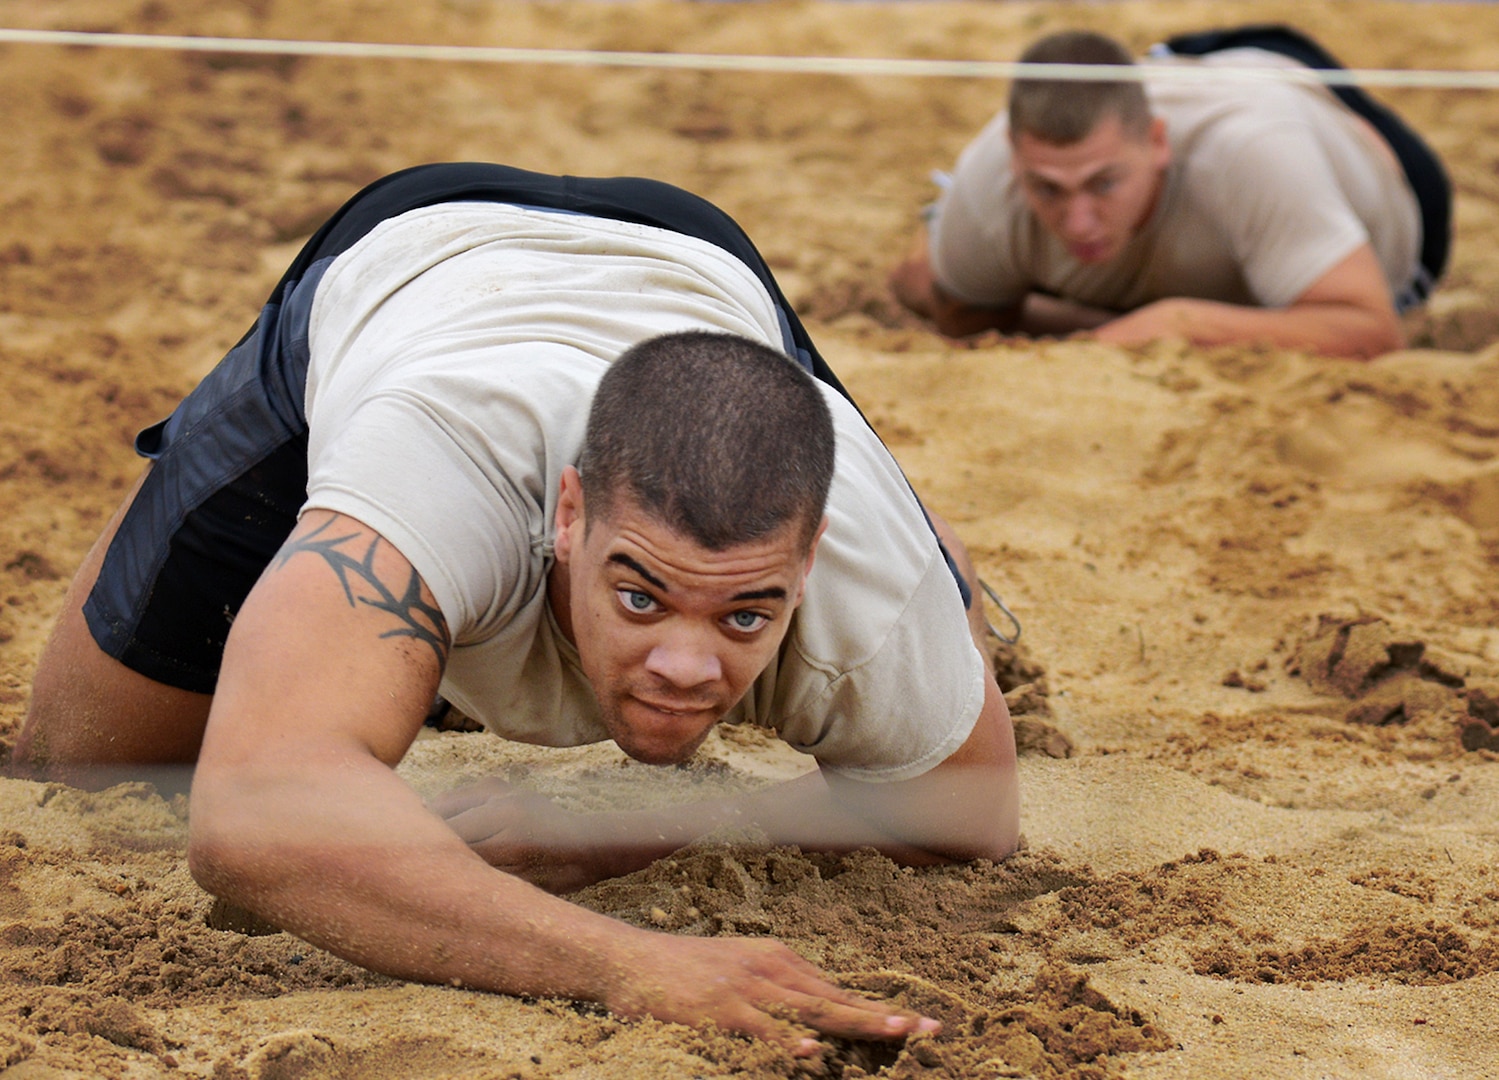 Members of team Wu-Tang, low crawl through the sand pit during the field exercises portion of the  Community Quest race September 18, at Joint Base San Antonio-Lackland. (U.S. Air Force photo by Benjamin Faske/released)